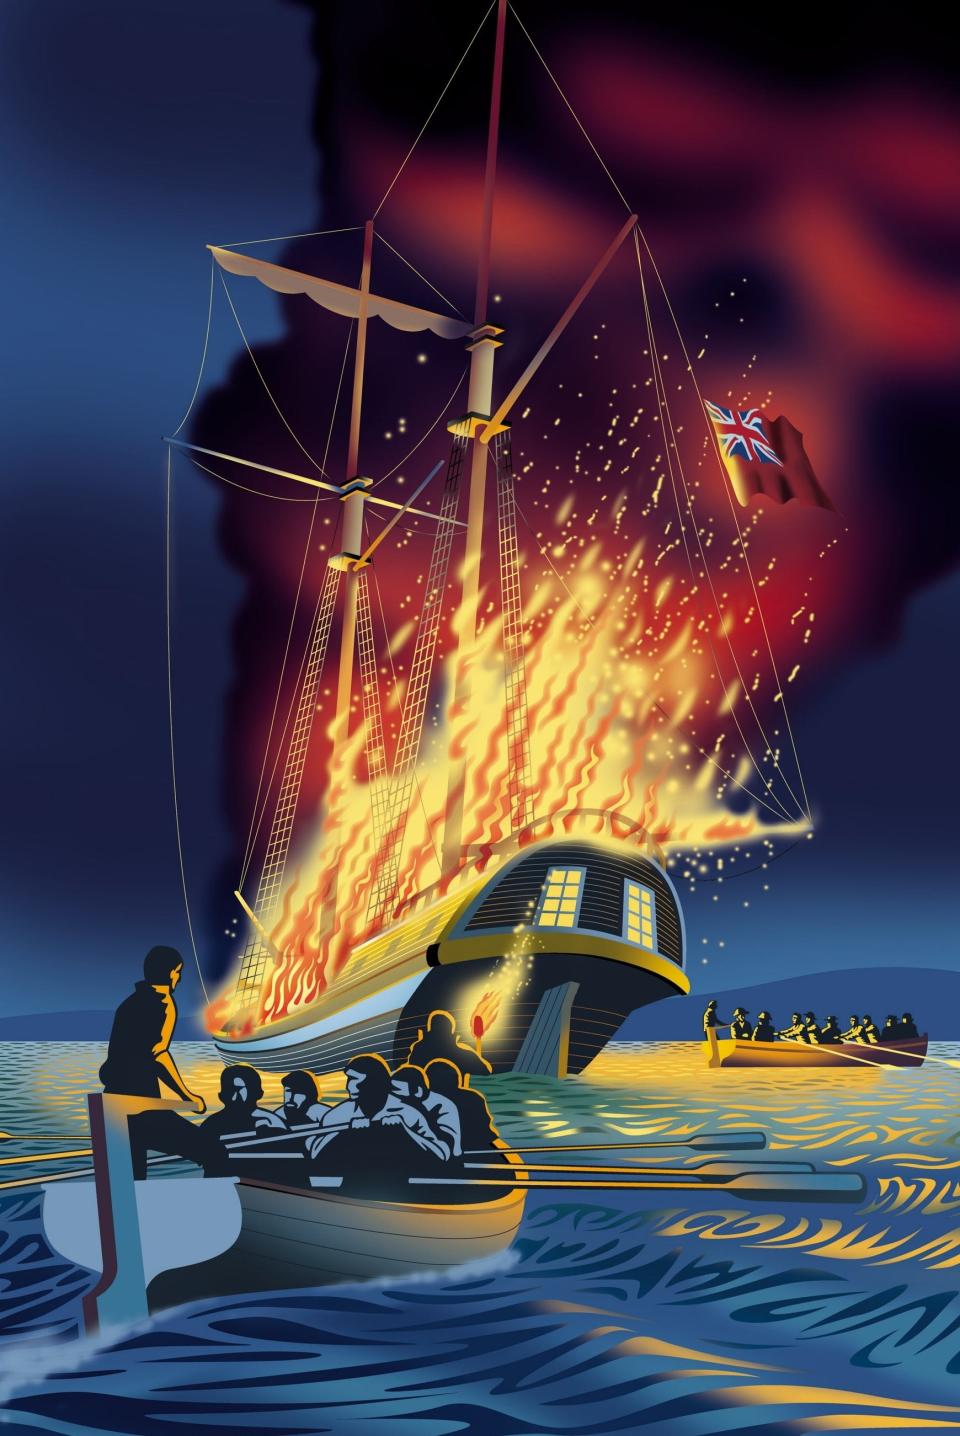 A depiction of the burning of the Gaspee in Narragansett Bay, a militant act of rebellion that predated the Boston Tea Party and the Battles of Lexington and Concord.